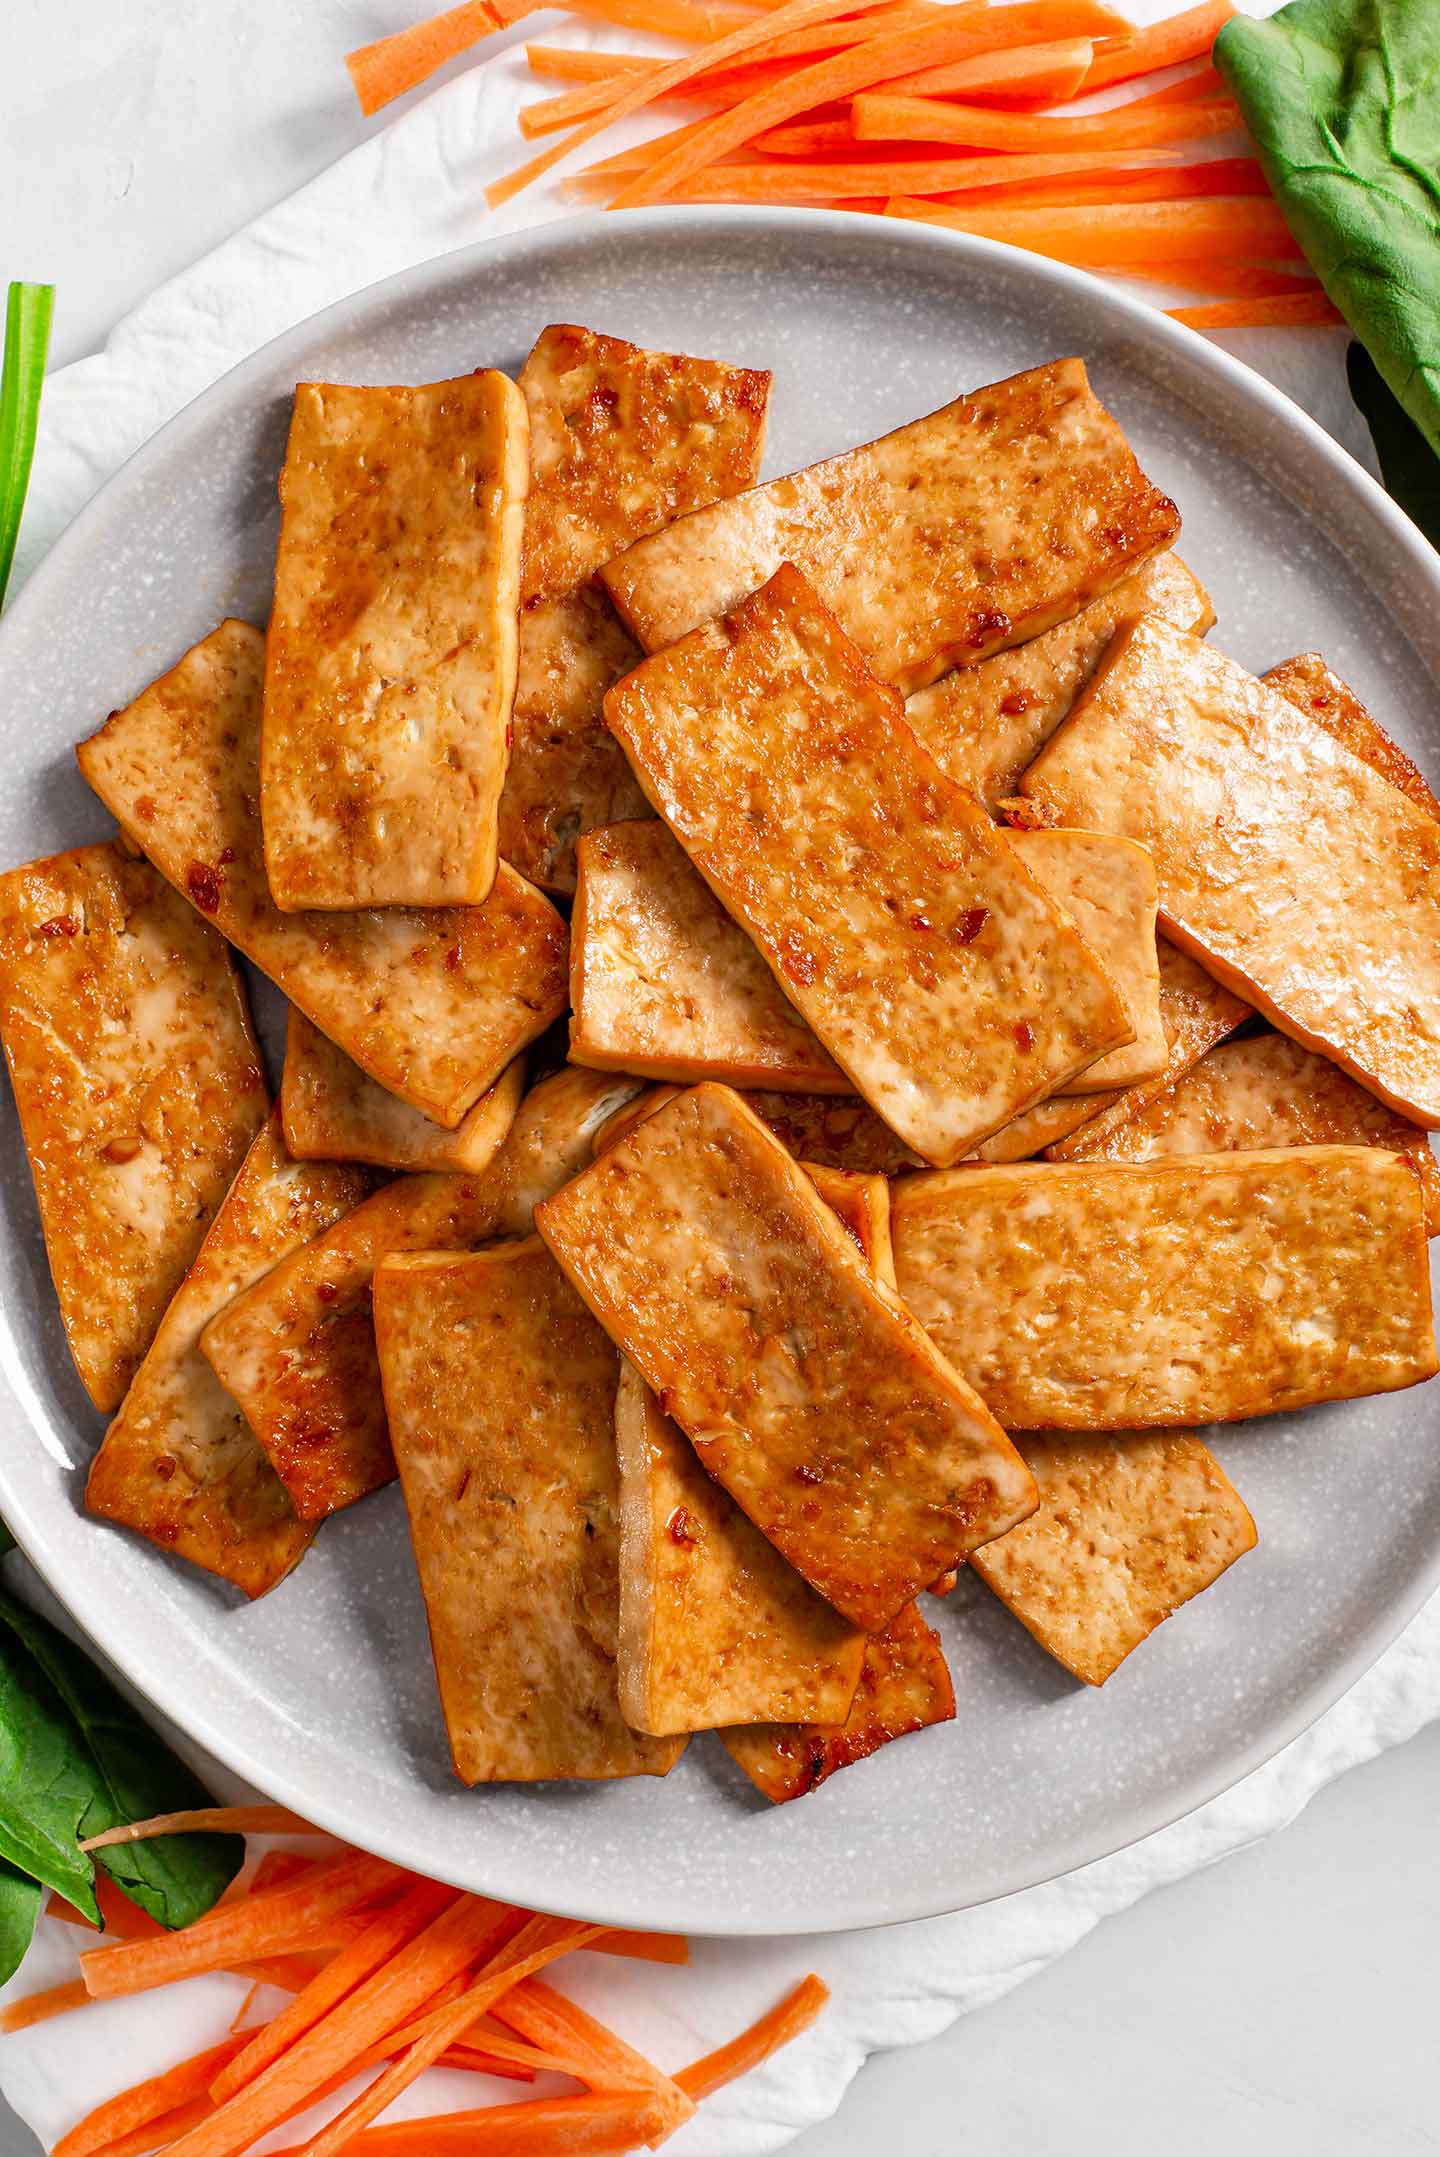 Top down view of cooked and seasoned strips of tofu. They are golden and crispy.